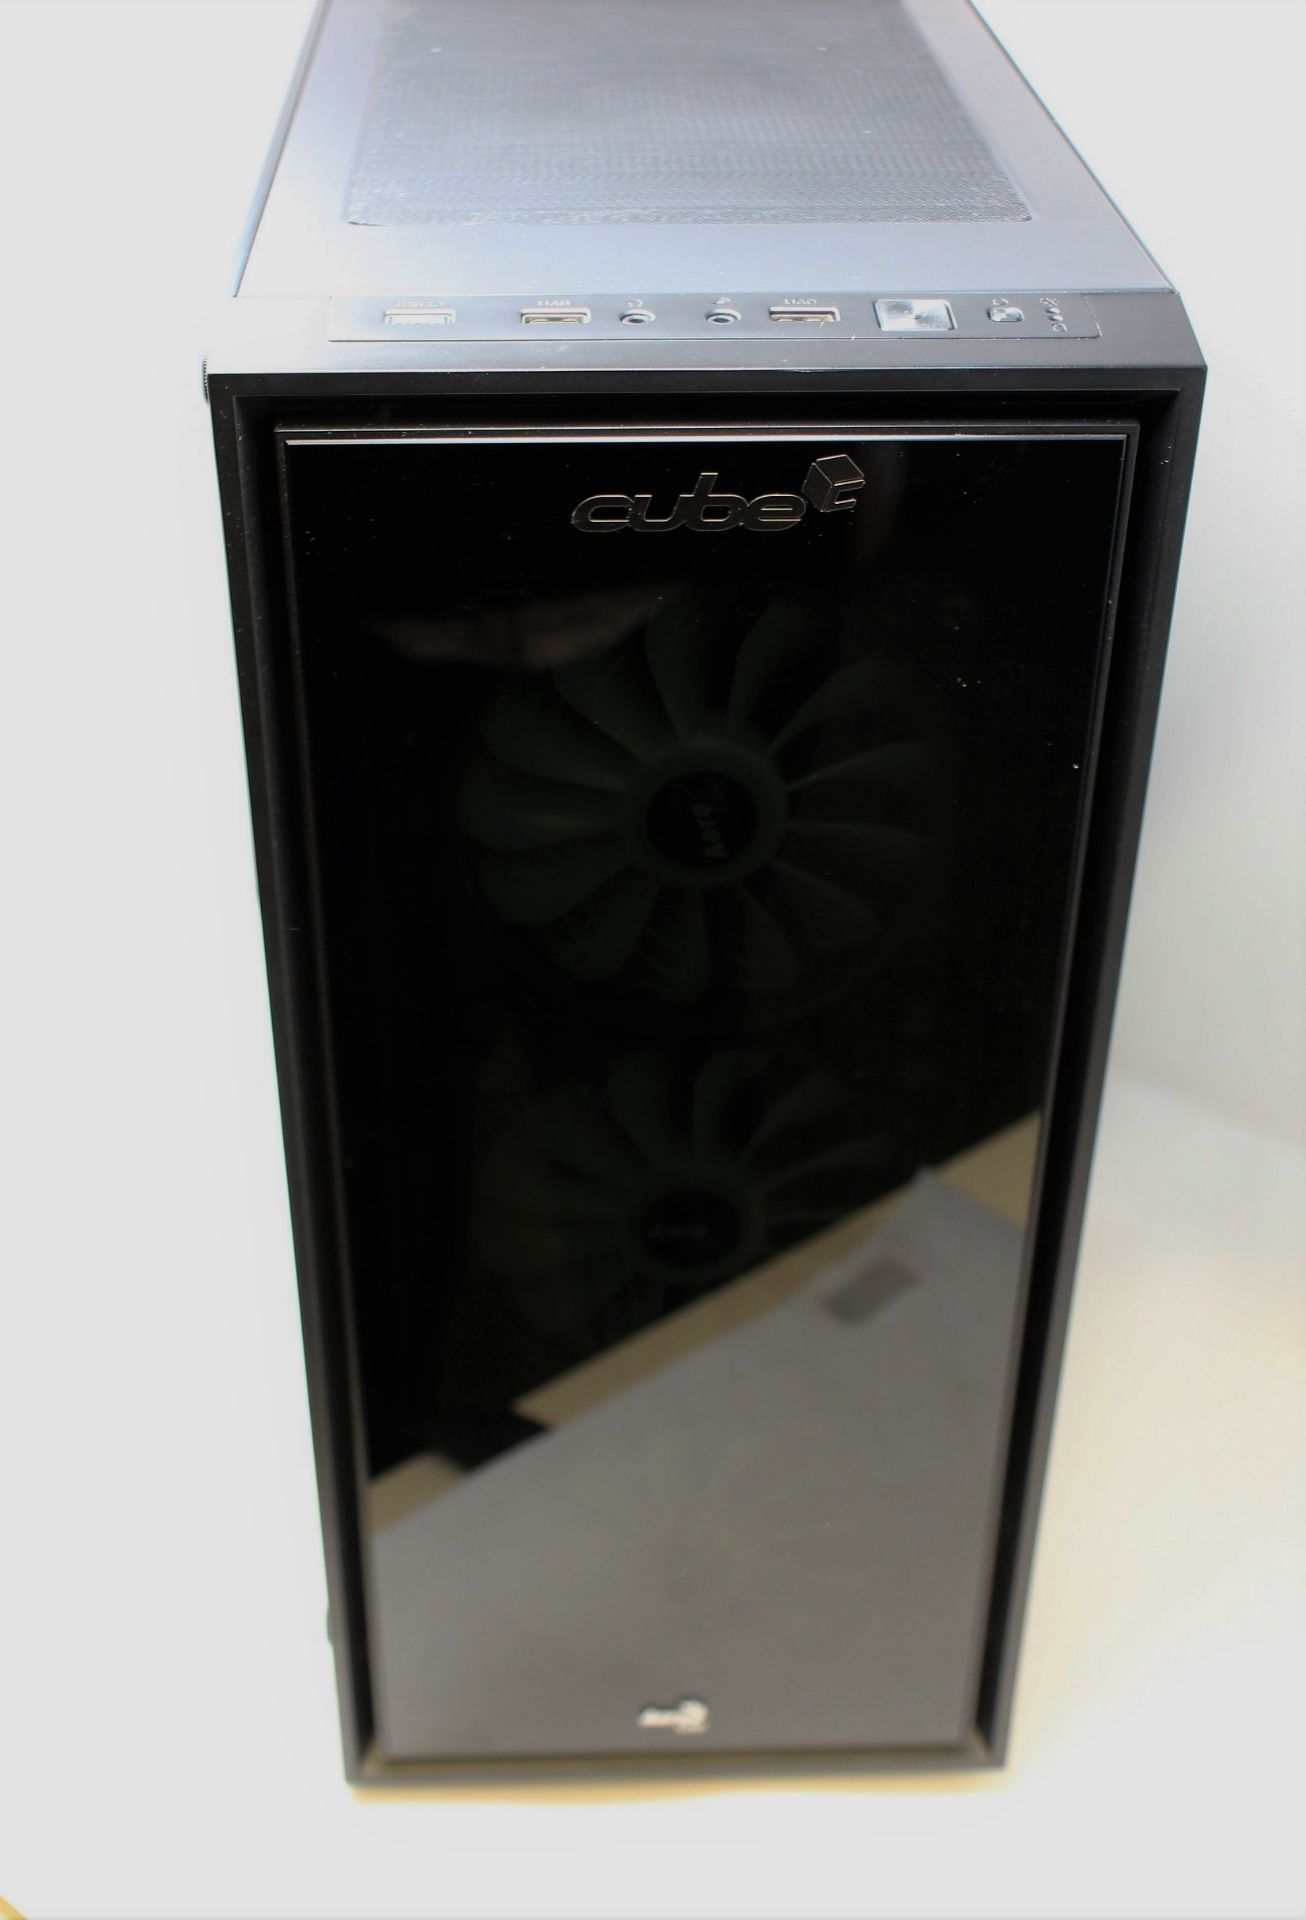 A pre-owned Cube Falcon RGB Custom Gaming PC in an AreoCool Quartz RGB Housing with Intel Core i5- - Image 8 of 15